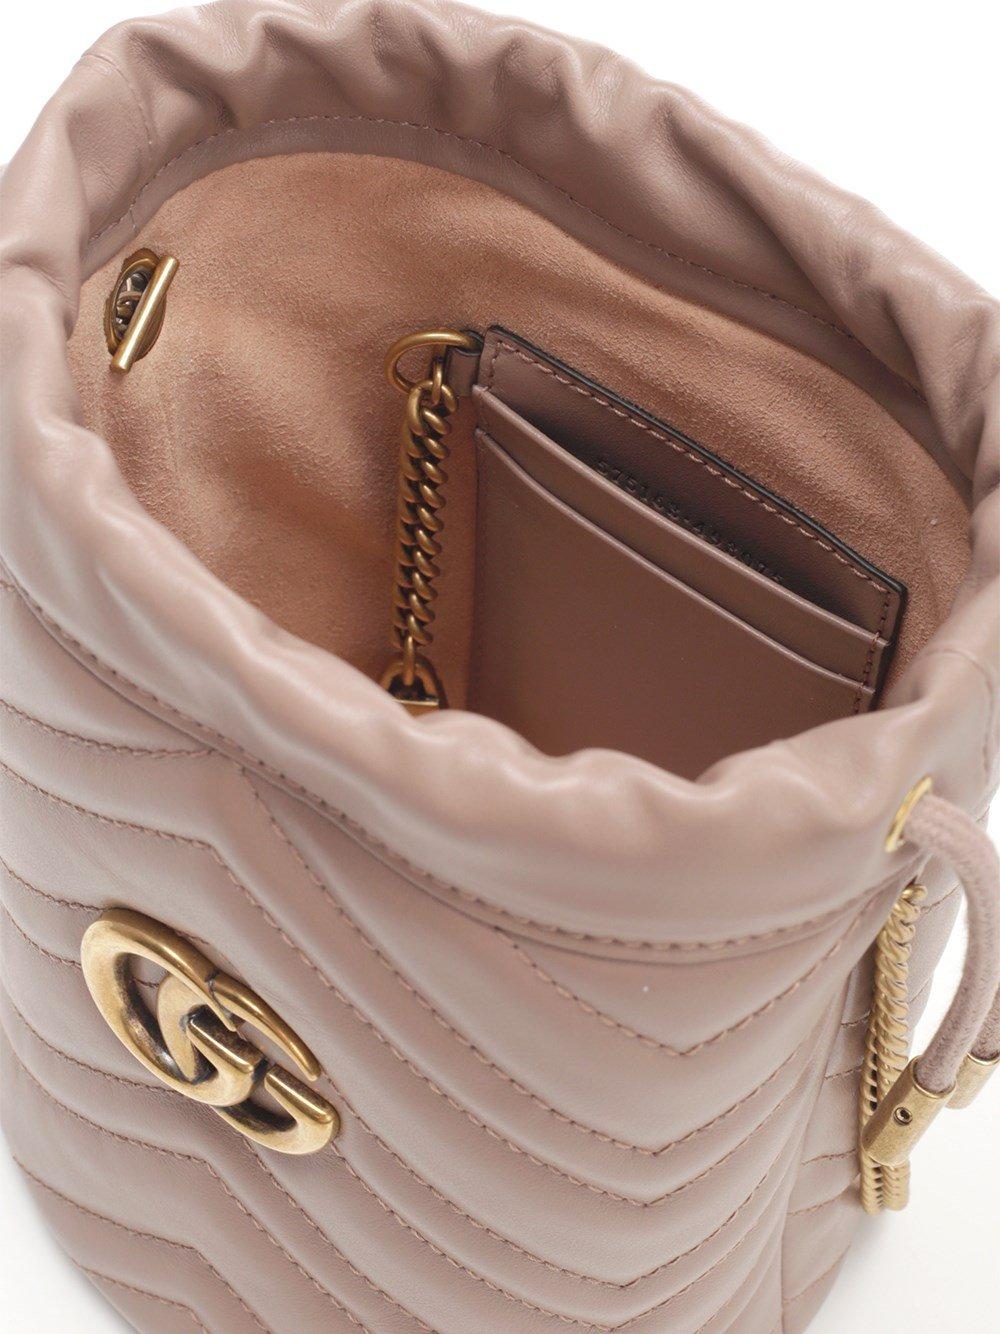 Gucci GG Marmont Leather Bucket Bag in Beige (Natural) | Lyst